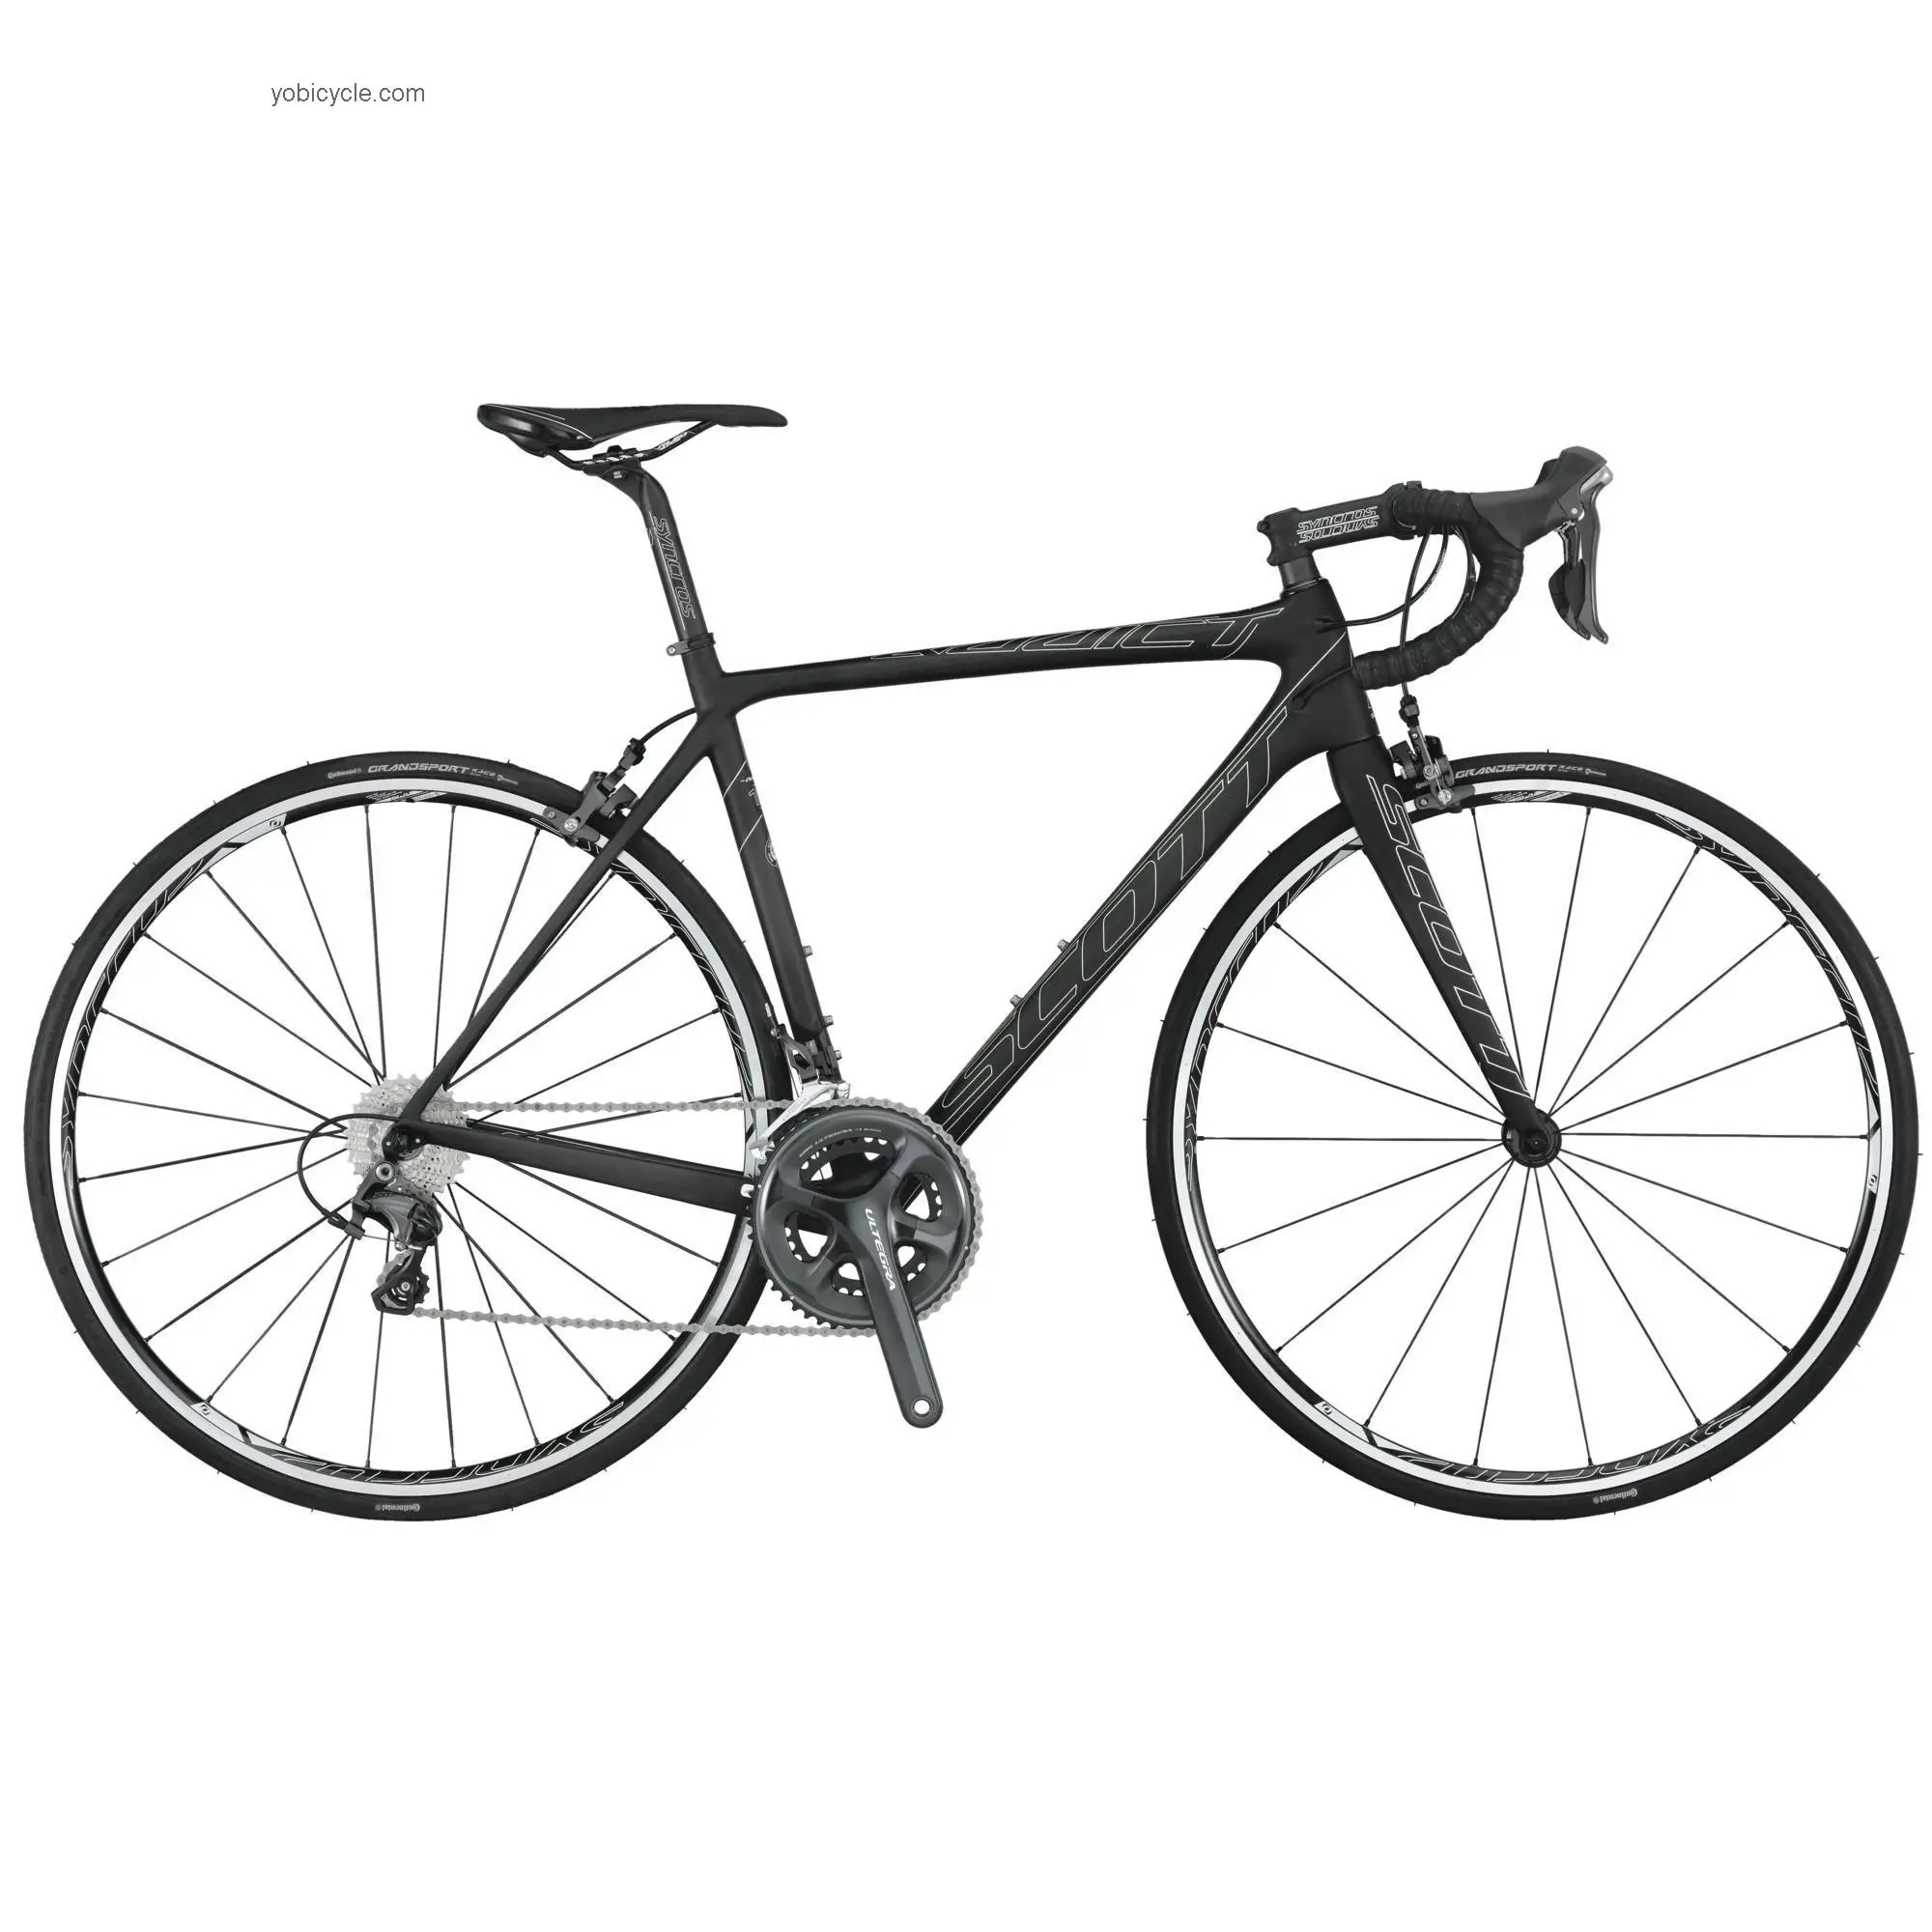 Scott  Addict 10 Technical data and specifications